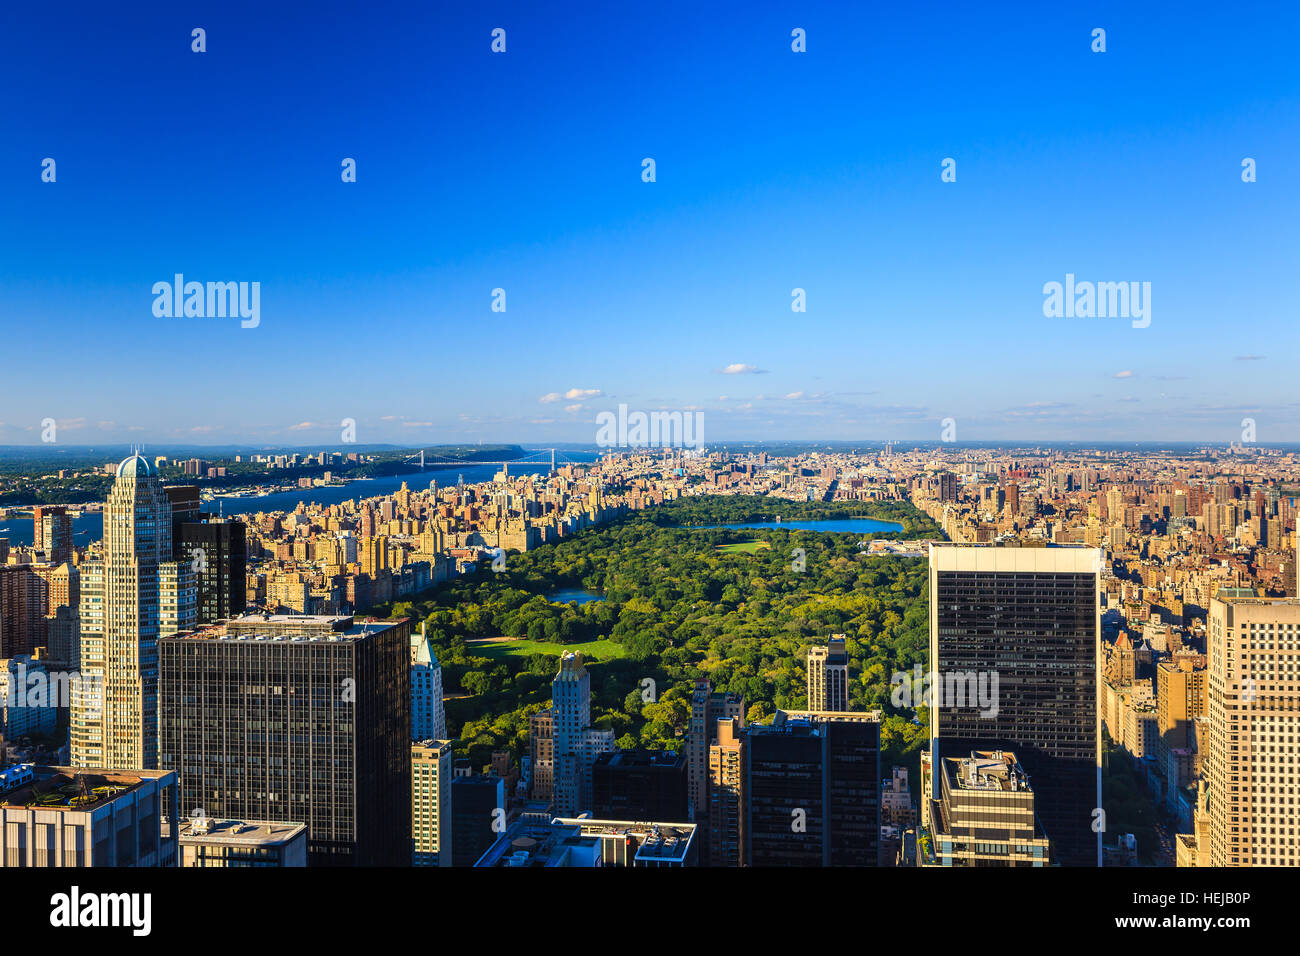 Manhattan view at sunset from "Top of the Rock" looking at Central Park and Upper West Side. Stock Photo